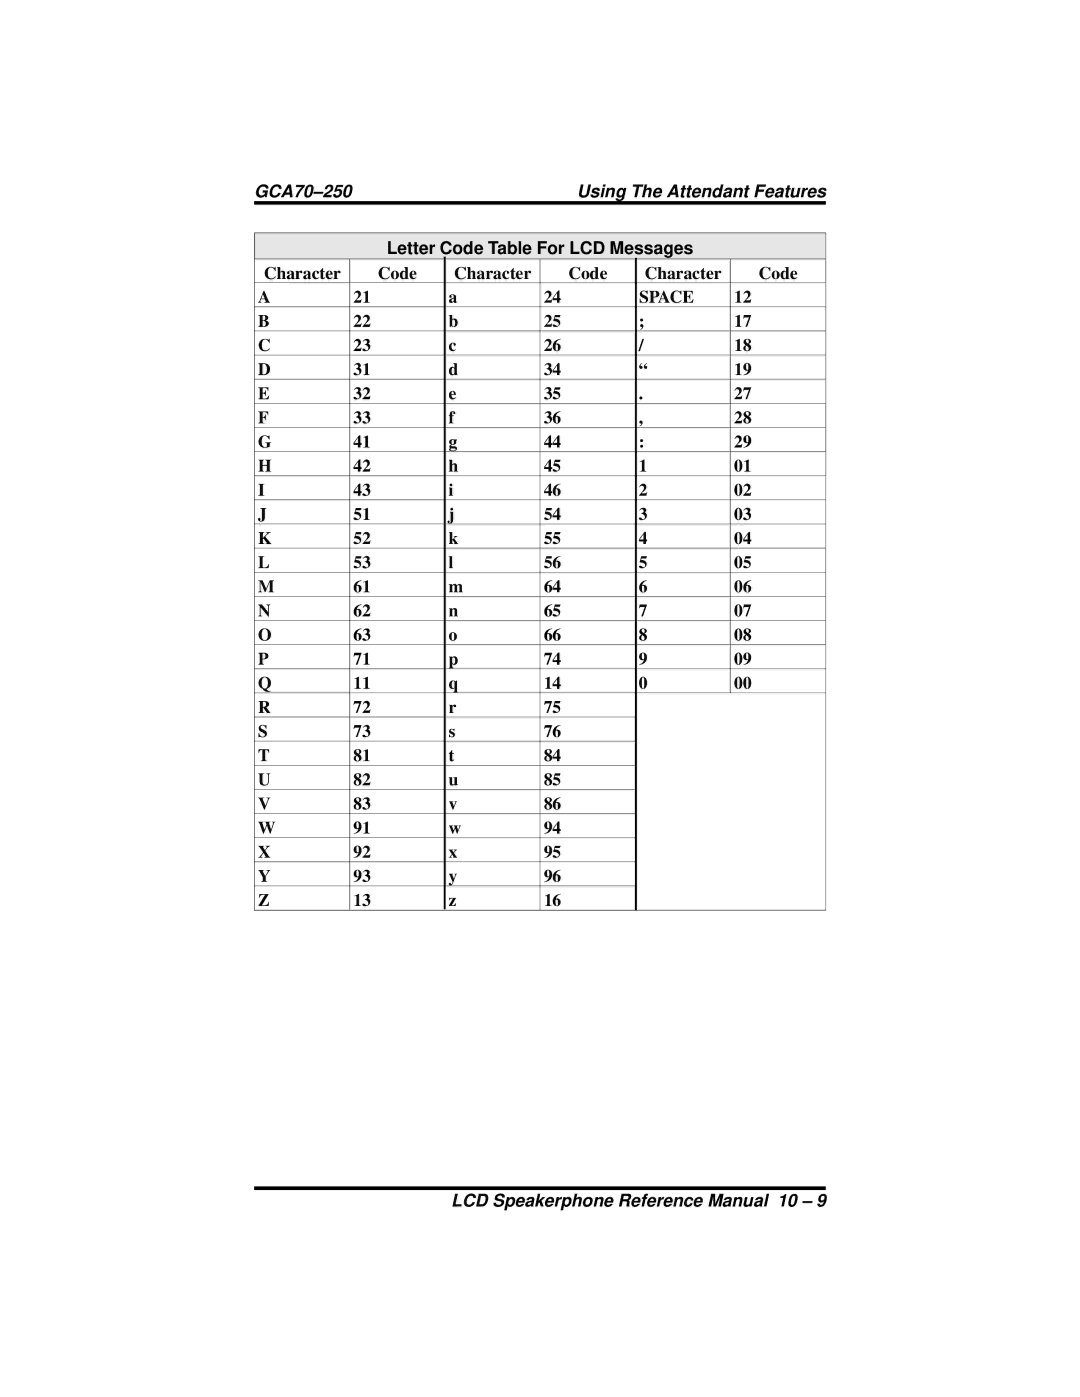 Vertical Communications 8324F, 8312S, 8324S manual Letter Code Table For LCD Messages 